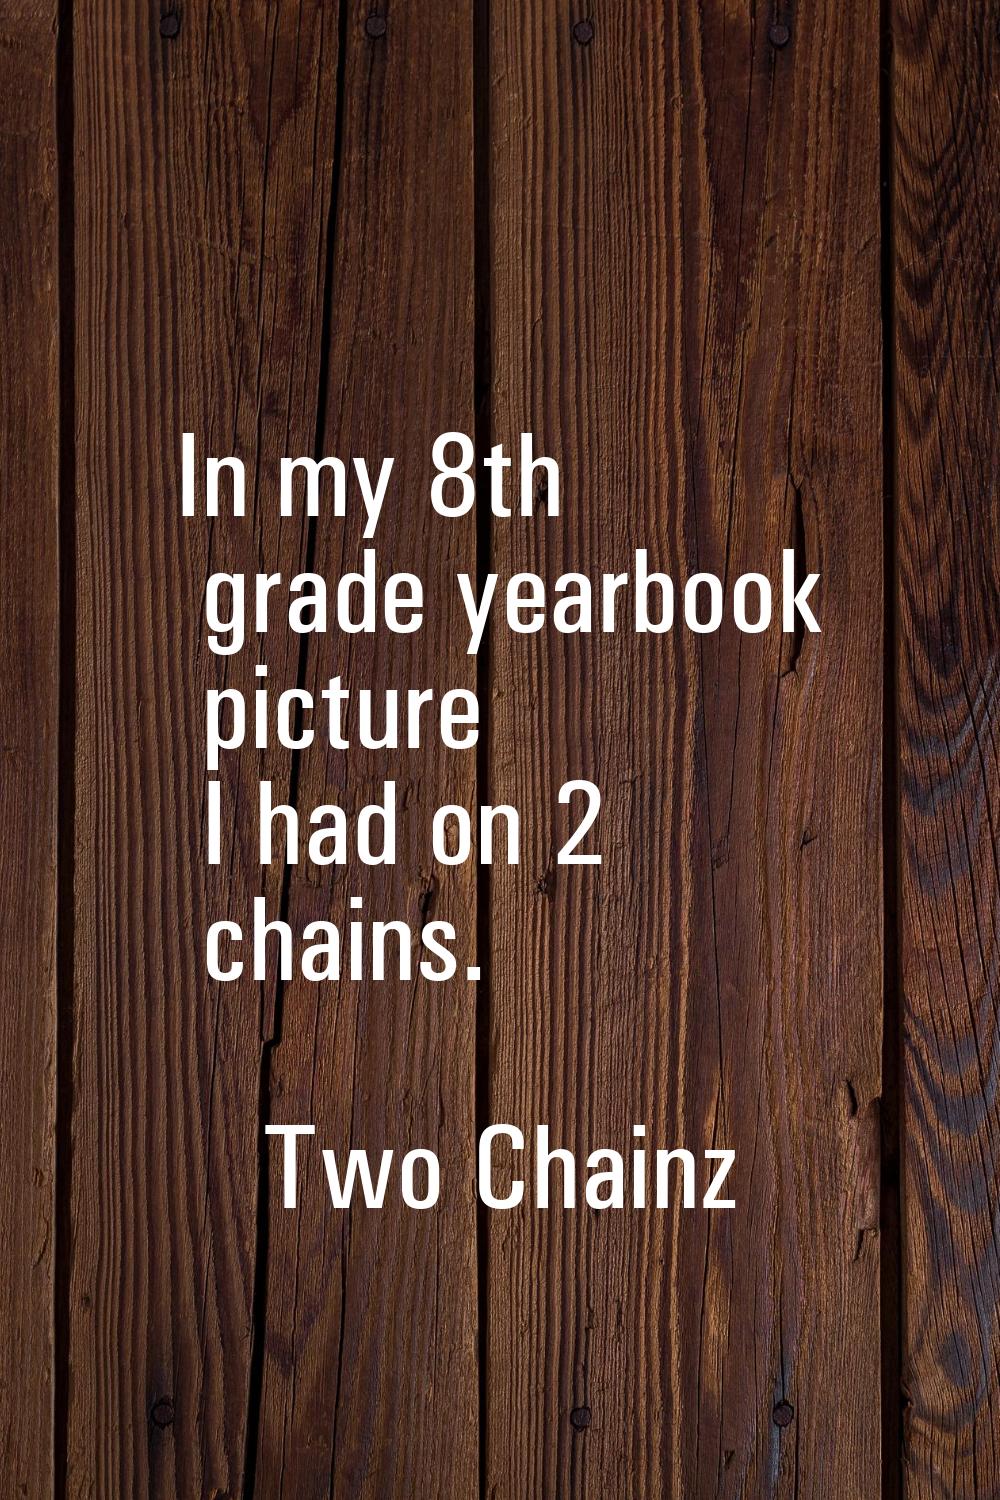 In my 8th grade yearbook picture I had on 2 chains.